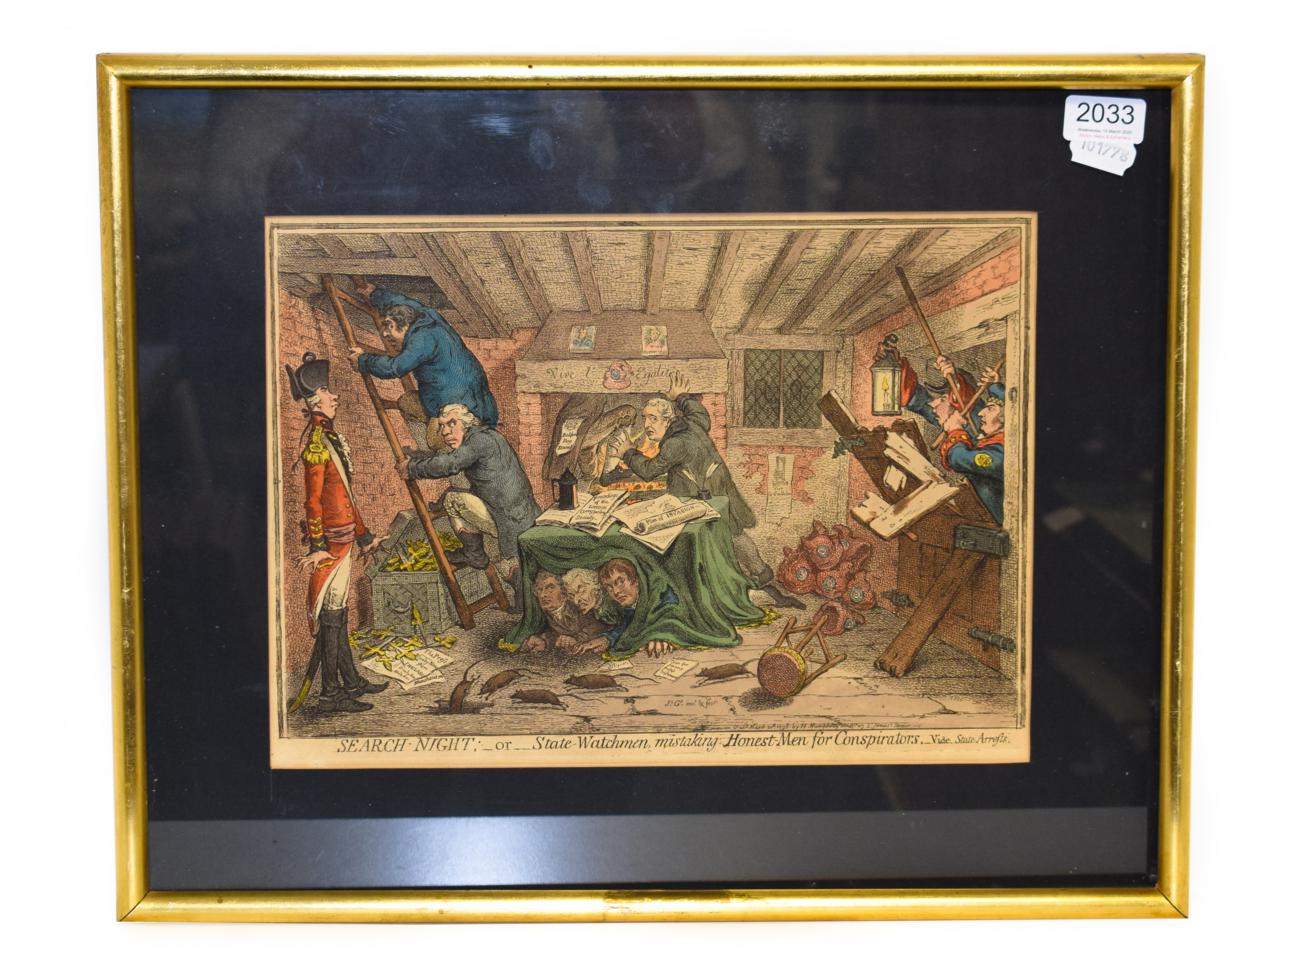 Lot 2033 - Gillray (James) Search-Night; or State-Watchmen, mistaking Honest-Men for Conspirators, Vide...